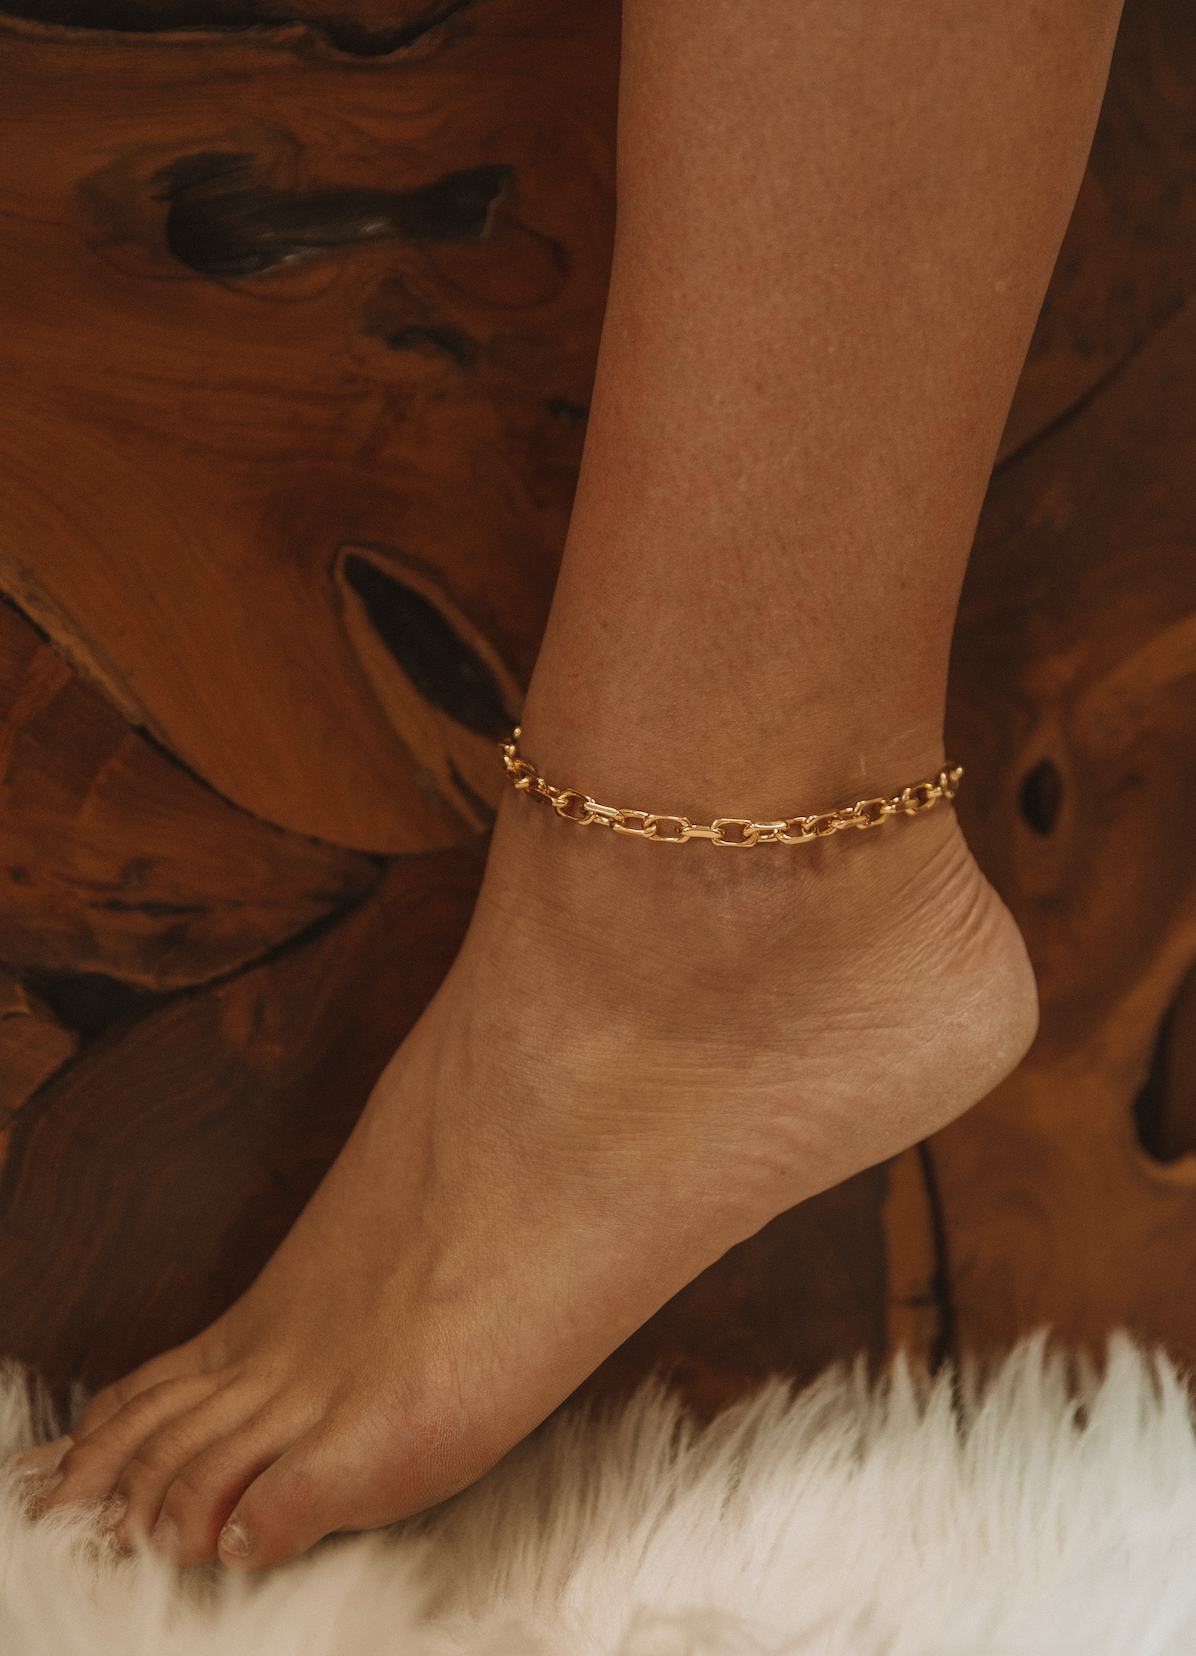 The Chunky Anklet